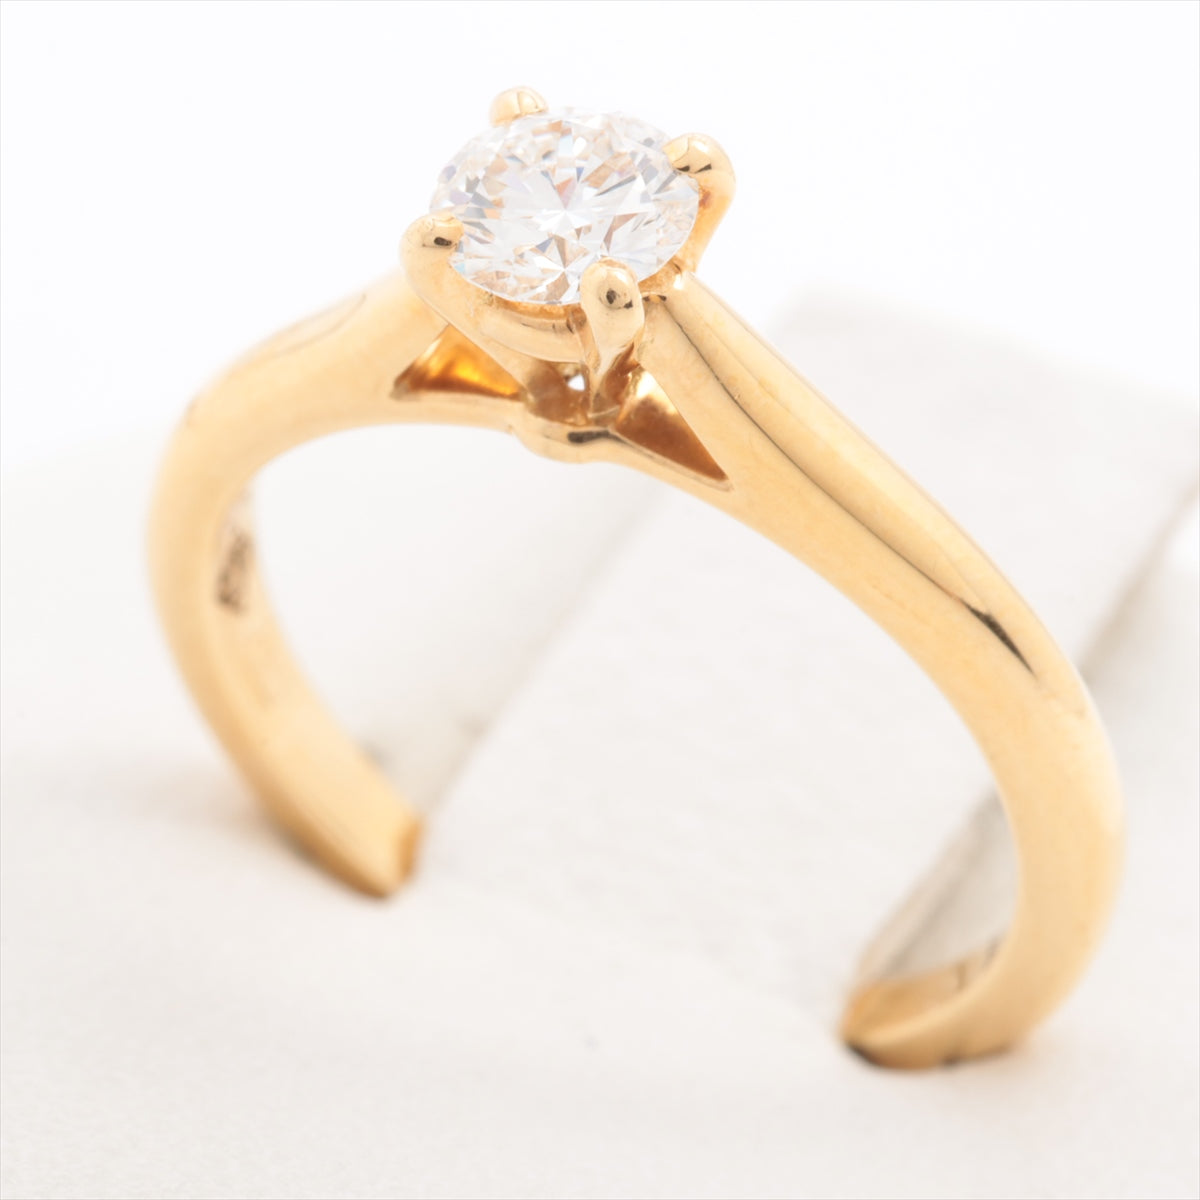 Cartier Solitaire 1895 Diamond Ring 750 (YG) 2.2g 0.27 45